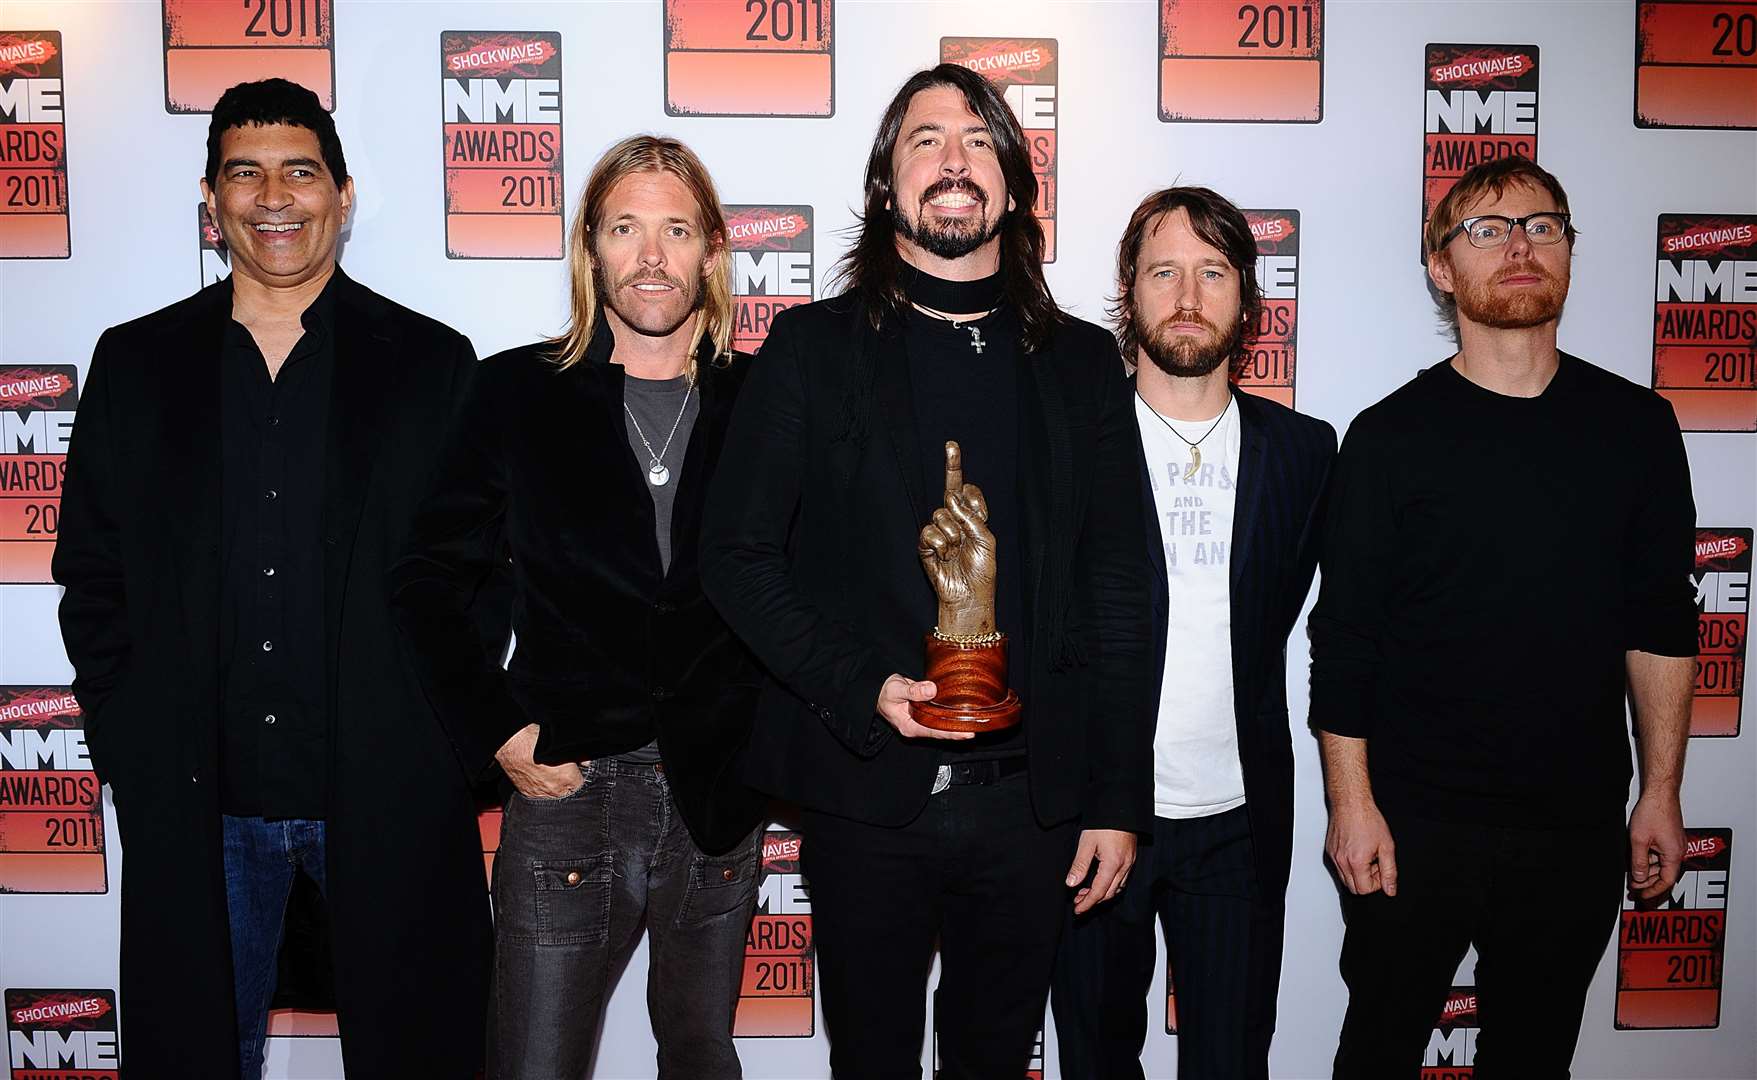 Hawkins had played in the Foos with former Nirvana drummer Dave Grohl on vocals for more than two decades, alongside Nate Mendel, Pat Smear, Chris Shiflett and Rami Jaffee (Ian West/PA)